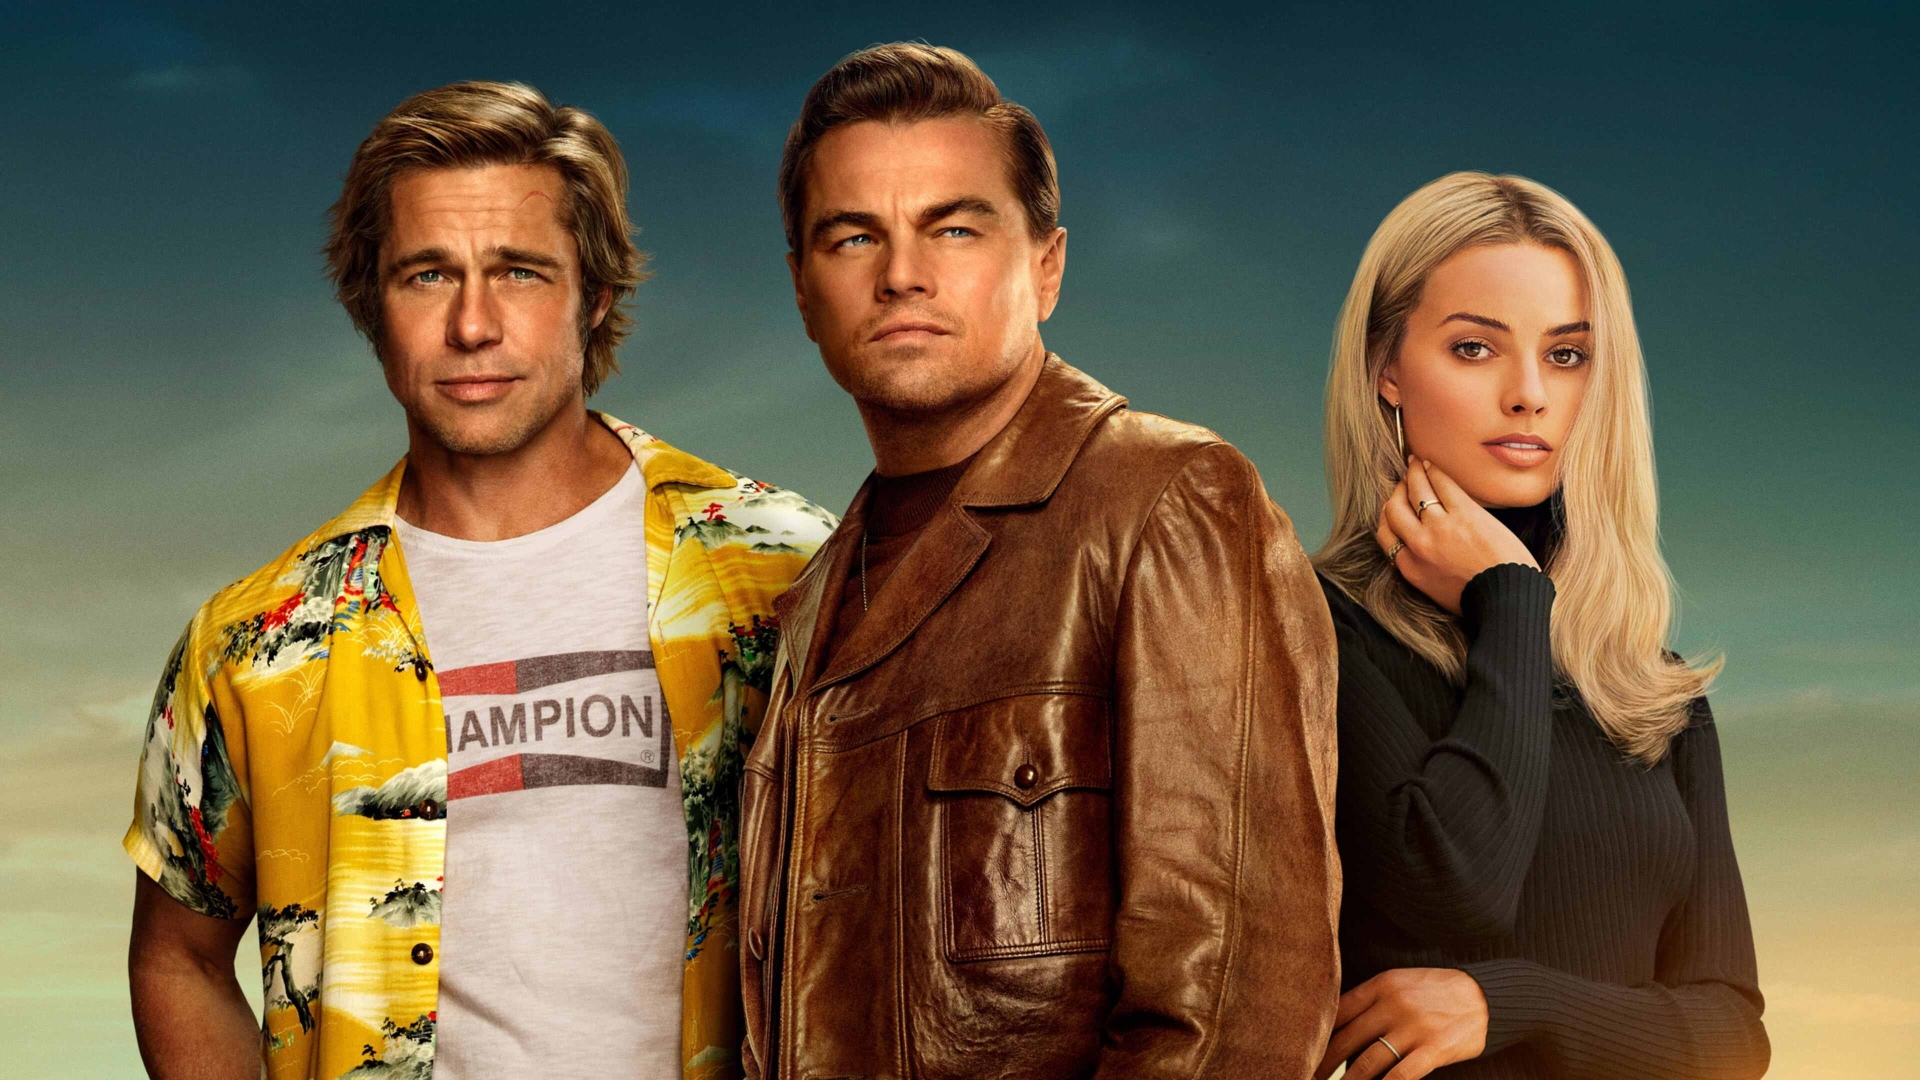 Once Upon a Time in... Hollywood (Once Upon a Time in Hollywood)